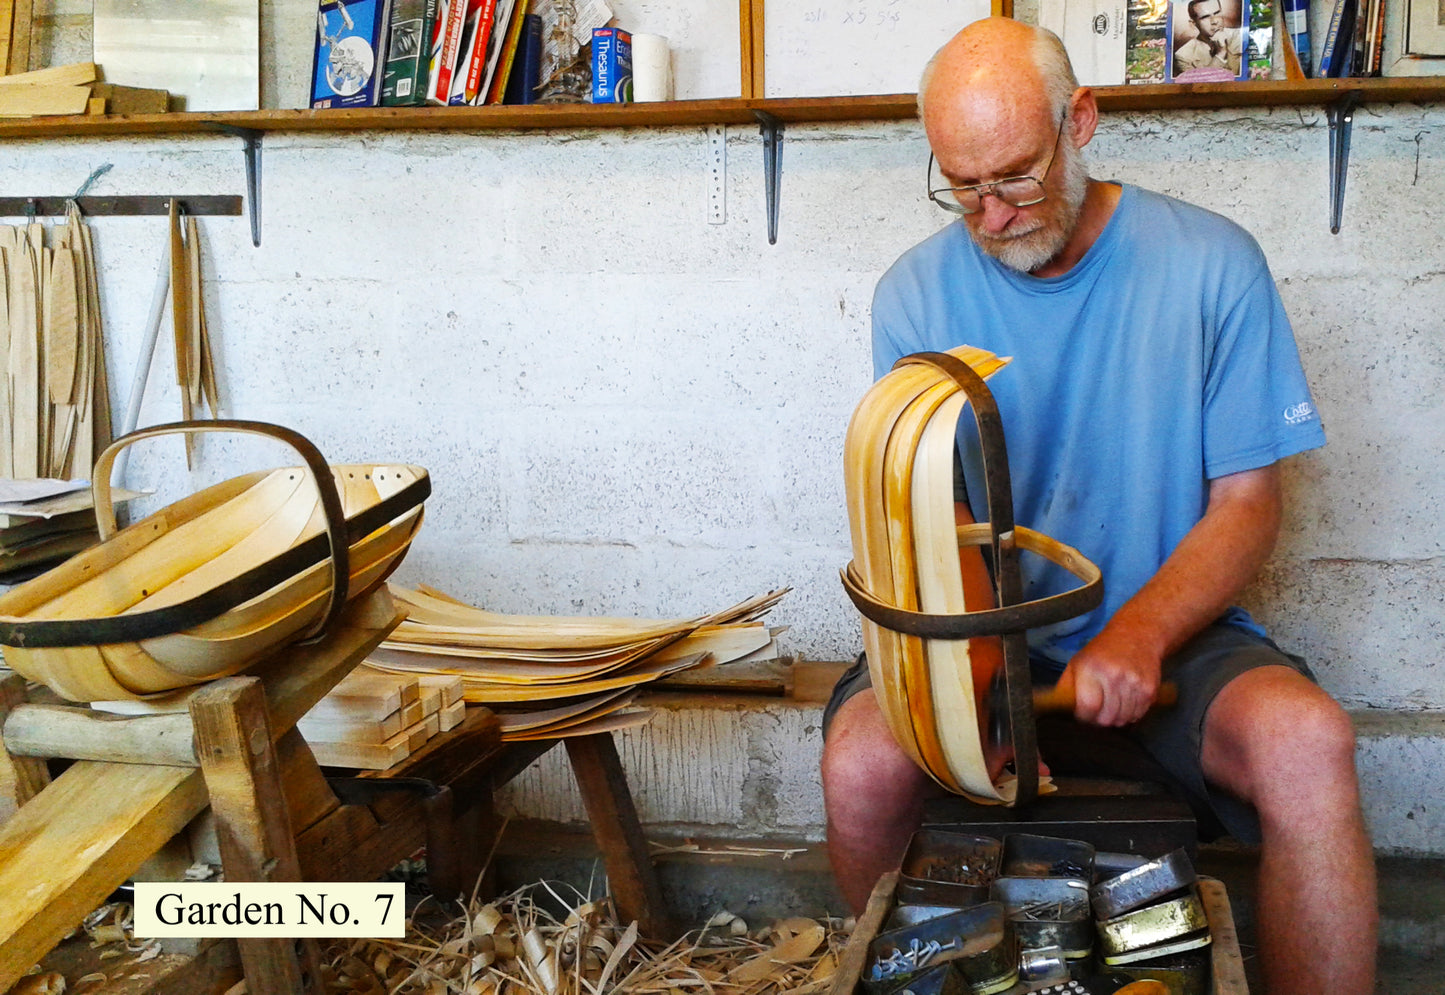 Sussex Garden Trug No. 7, being made in our workshop in Herstmoncuex from traditional, sustainable materials